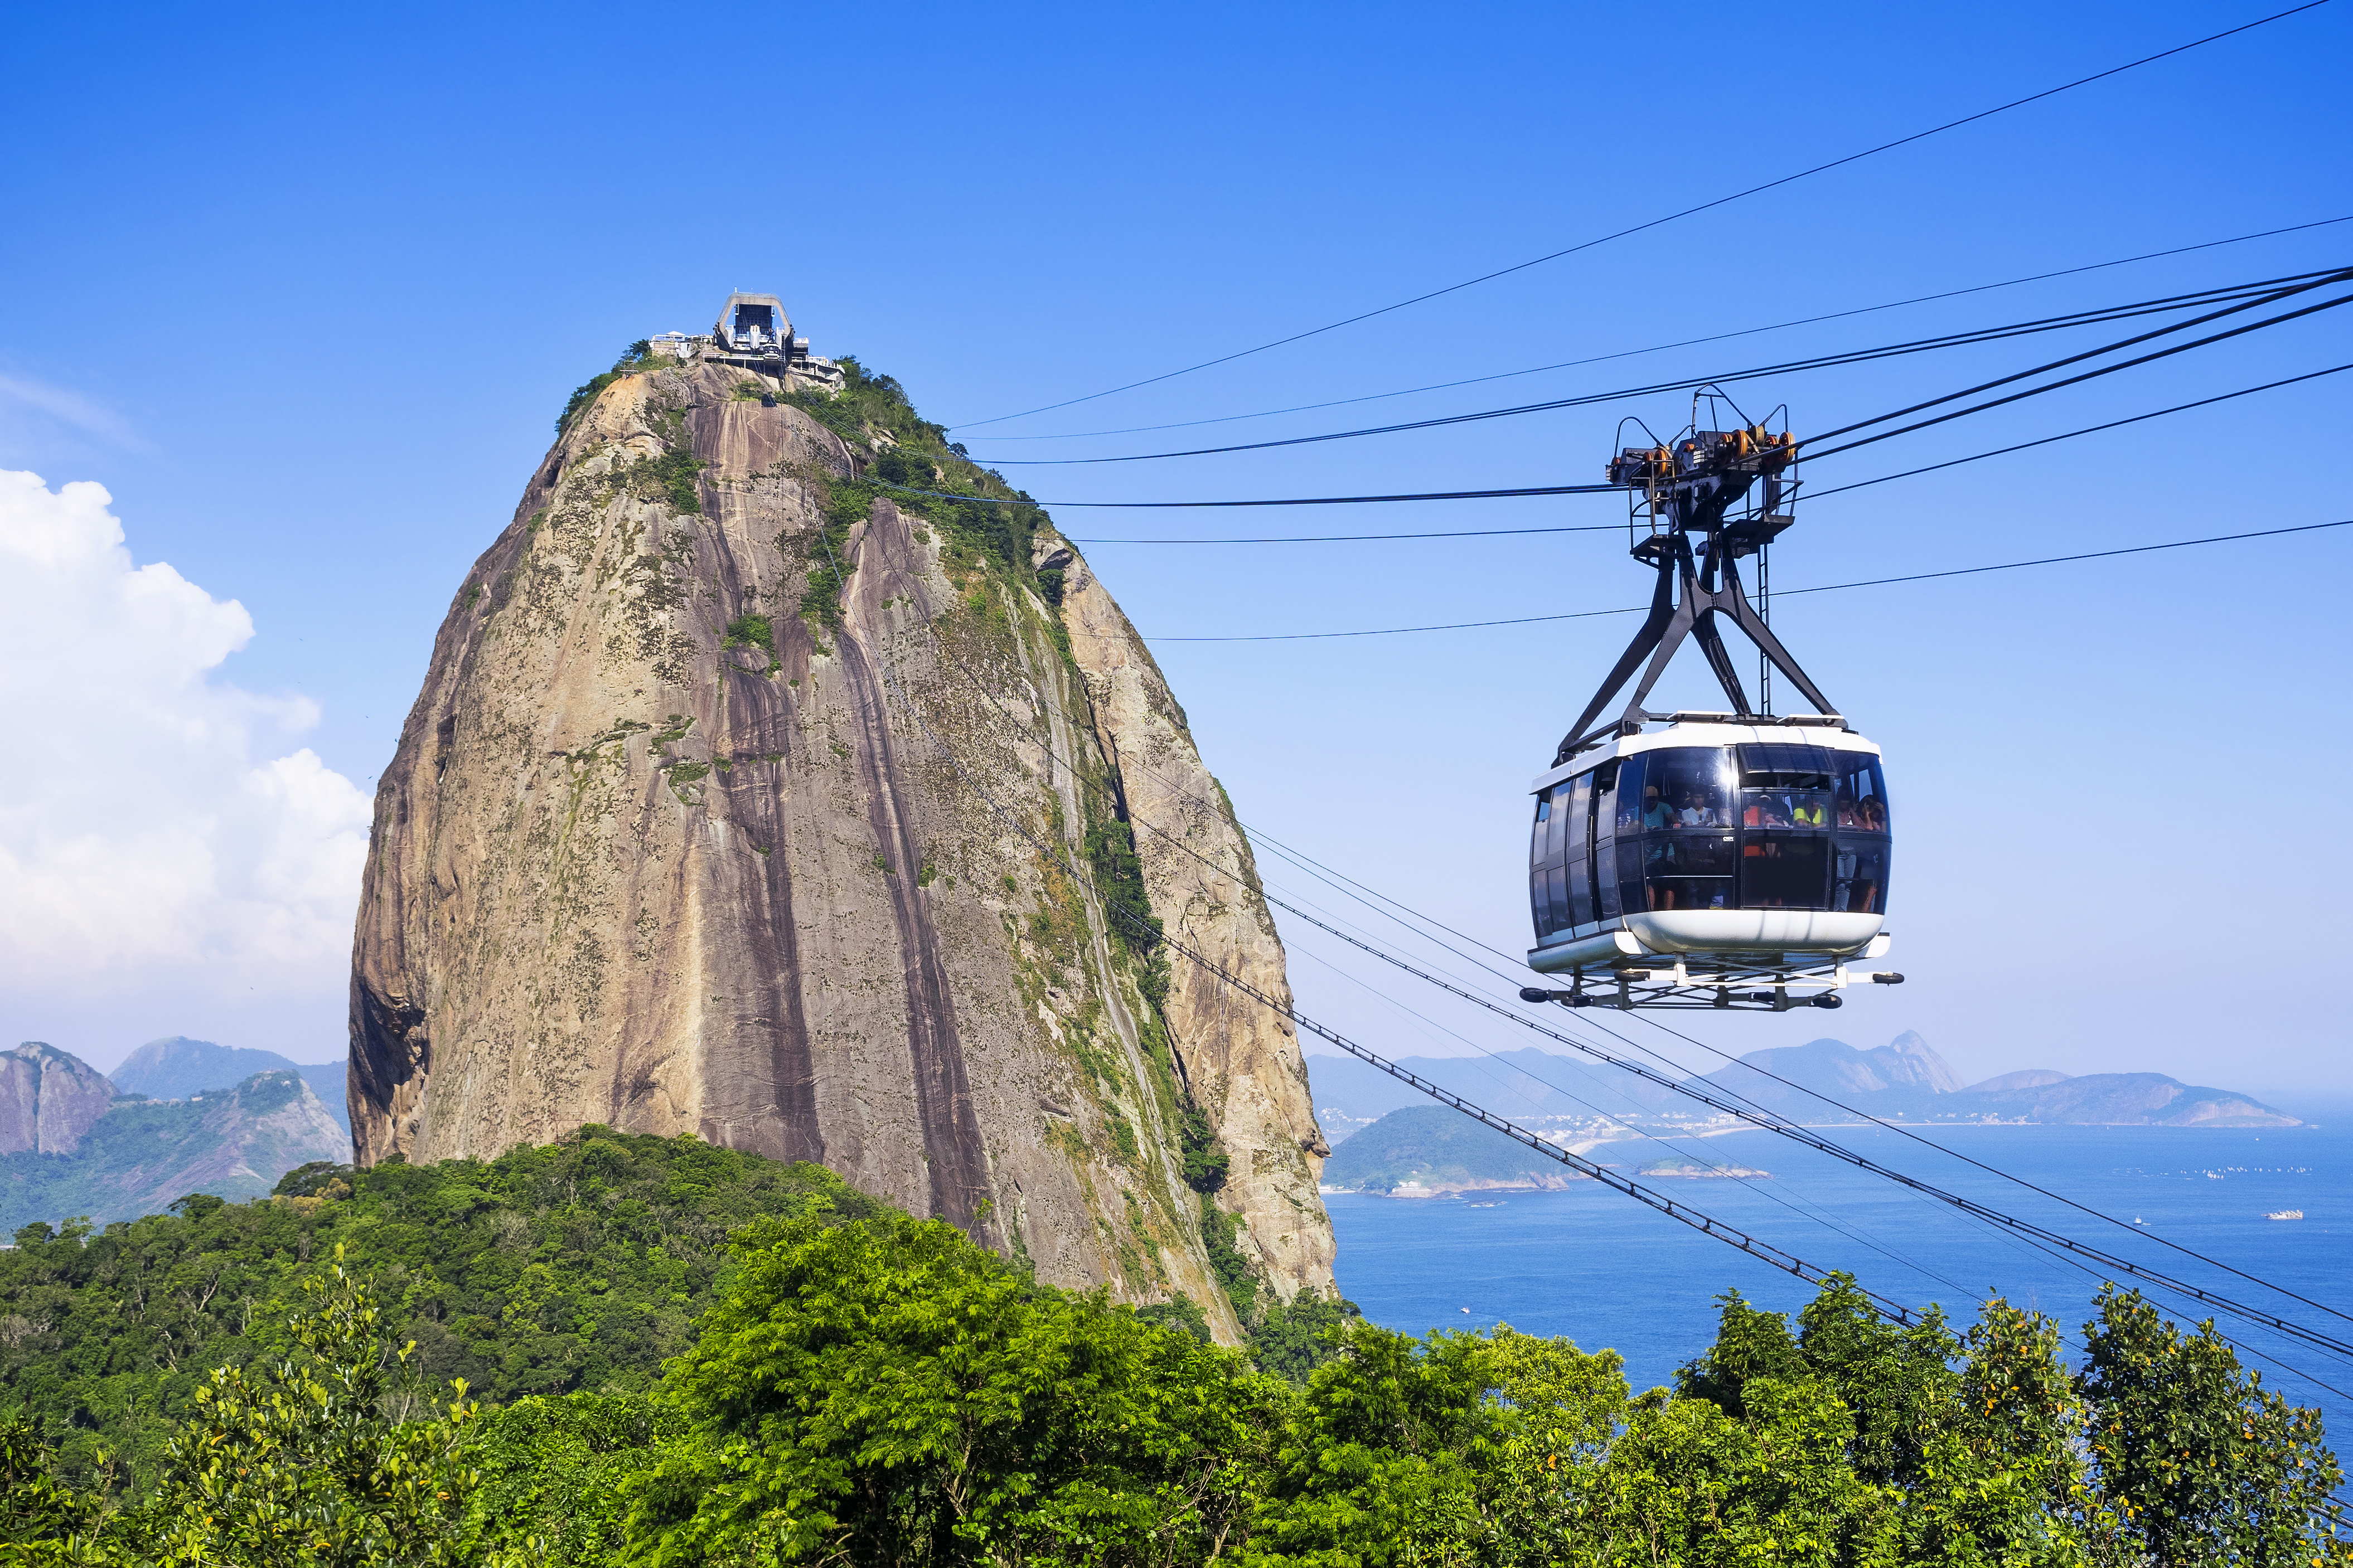 A glass-sided cable car is suspended from cables above dense leafy forest. The cable car appears to be moving towards the summit of Rio’s Sugarloaf Mountain, a tall but narrow mountain jutting out of the forest. The sea is visible in the background.